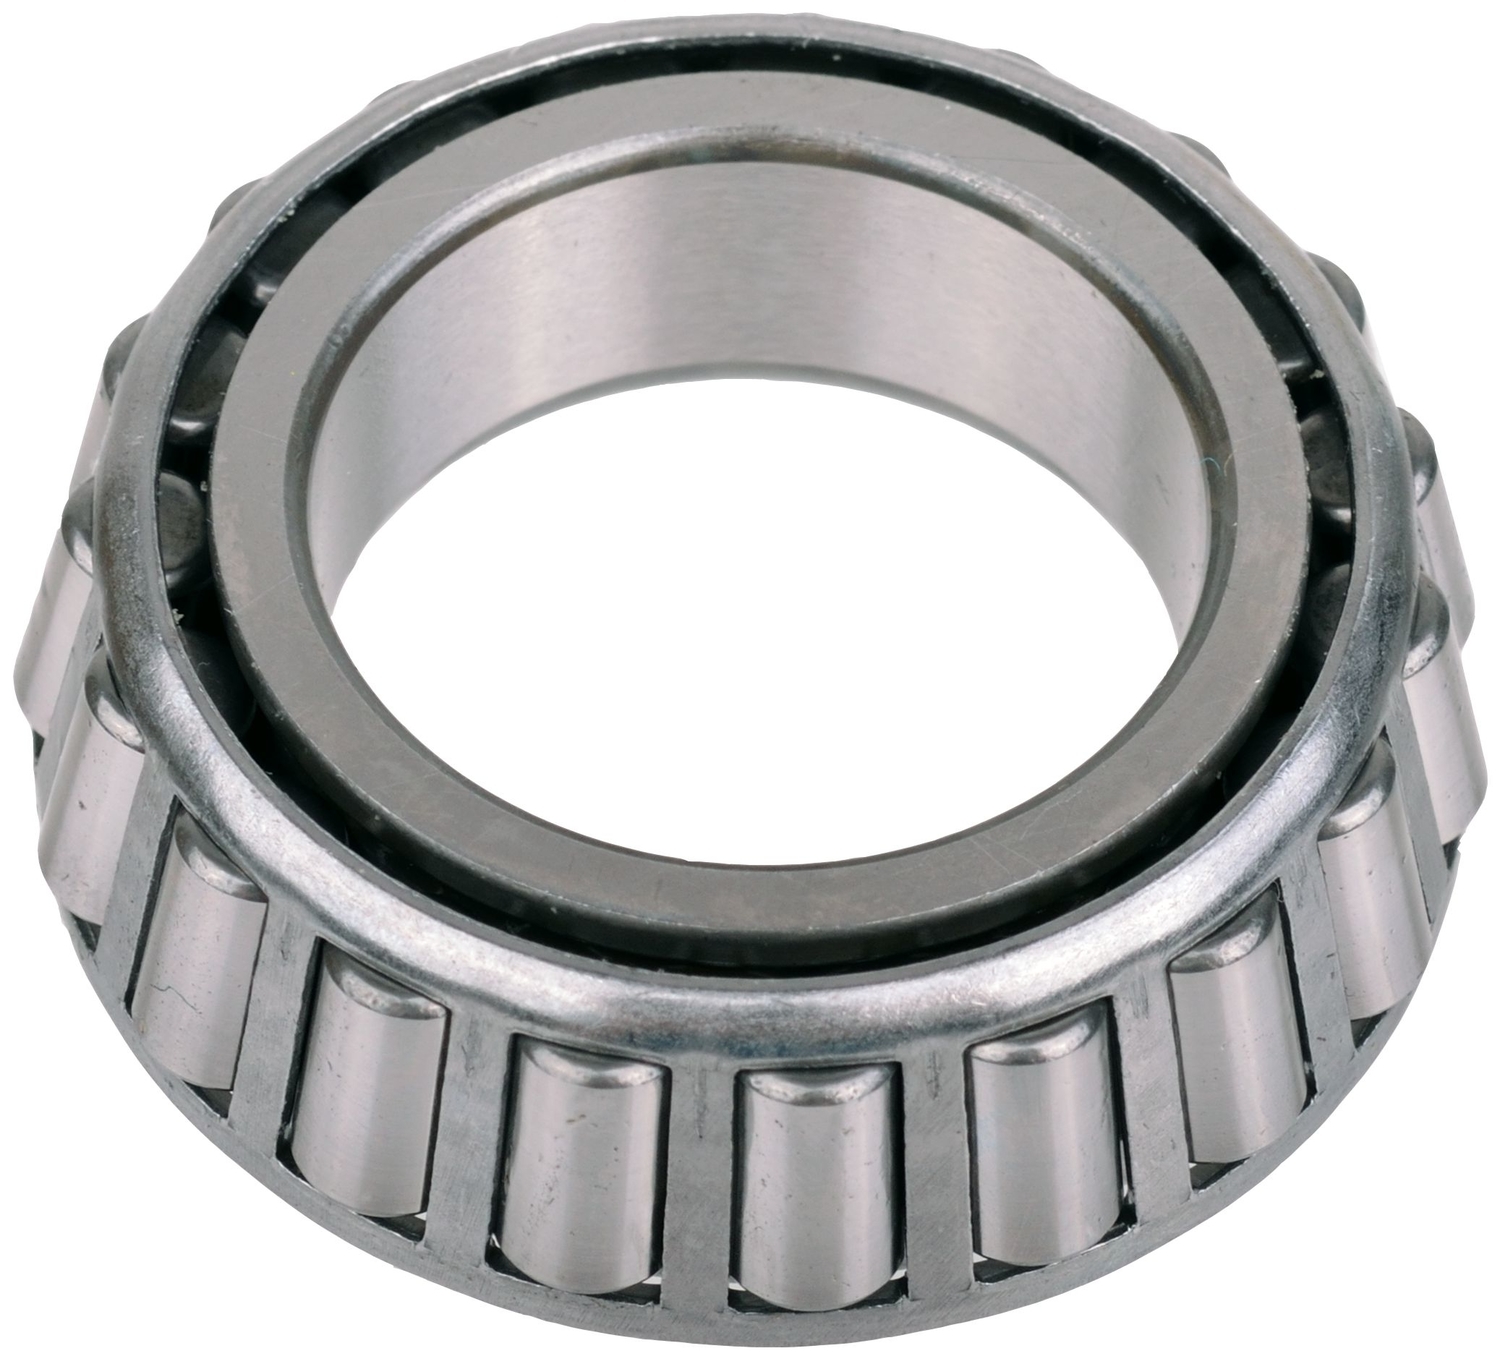 SKF (CHICAGO RAWHIDE) - Differential Pinion Bearing - SKF L44649 VP